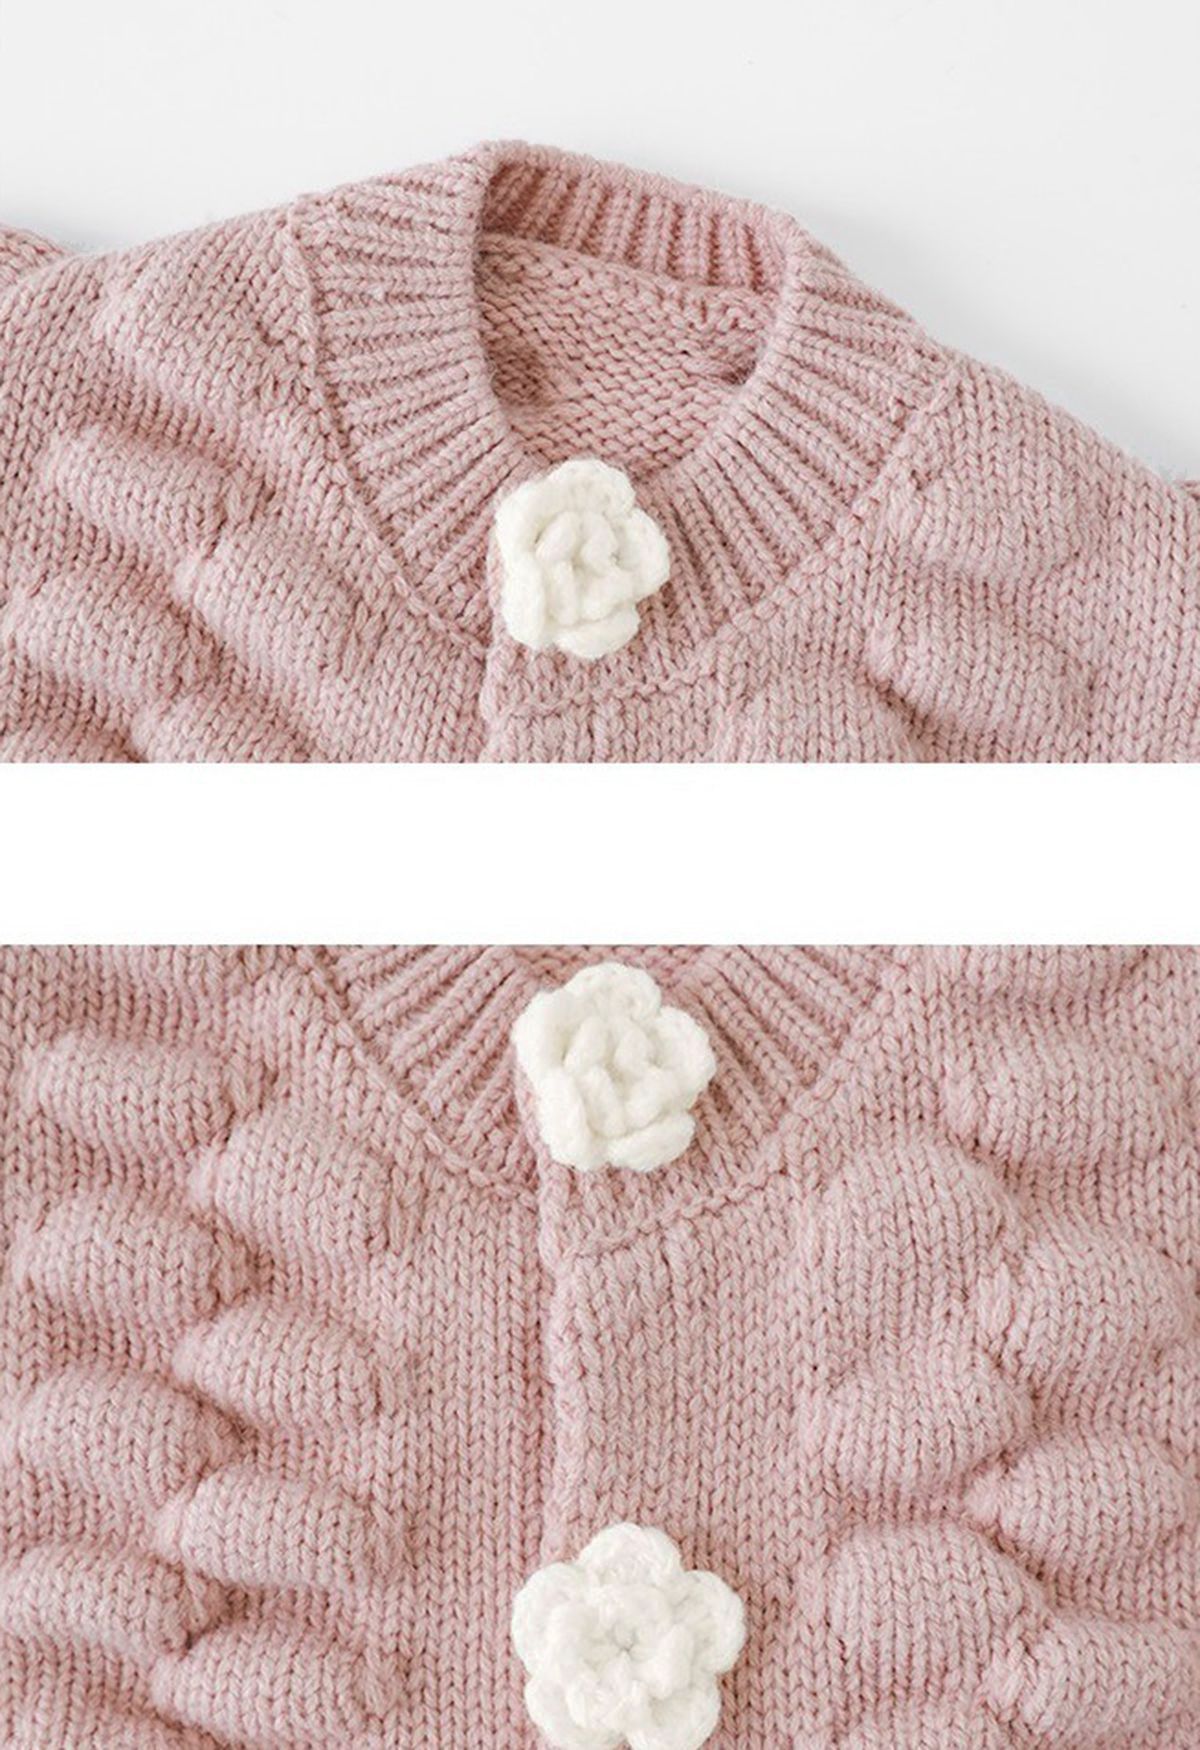 Kids Flowers Button Down Embossed Bubble Sleeves Cardigan in Pink